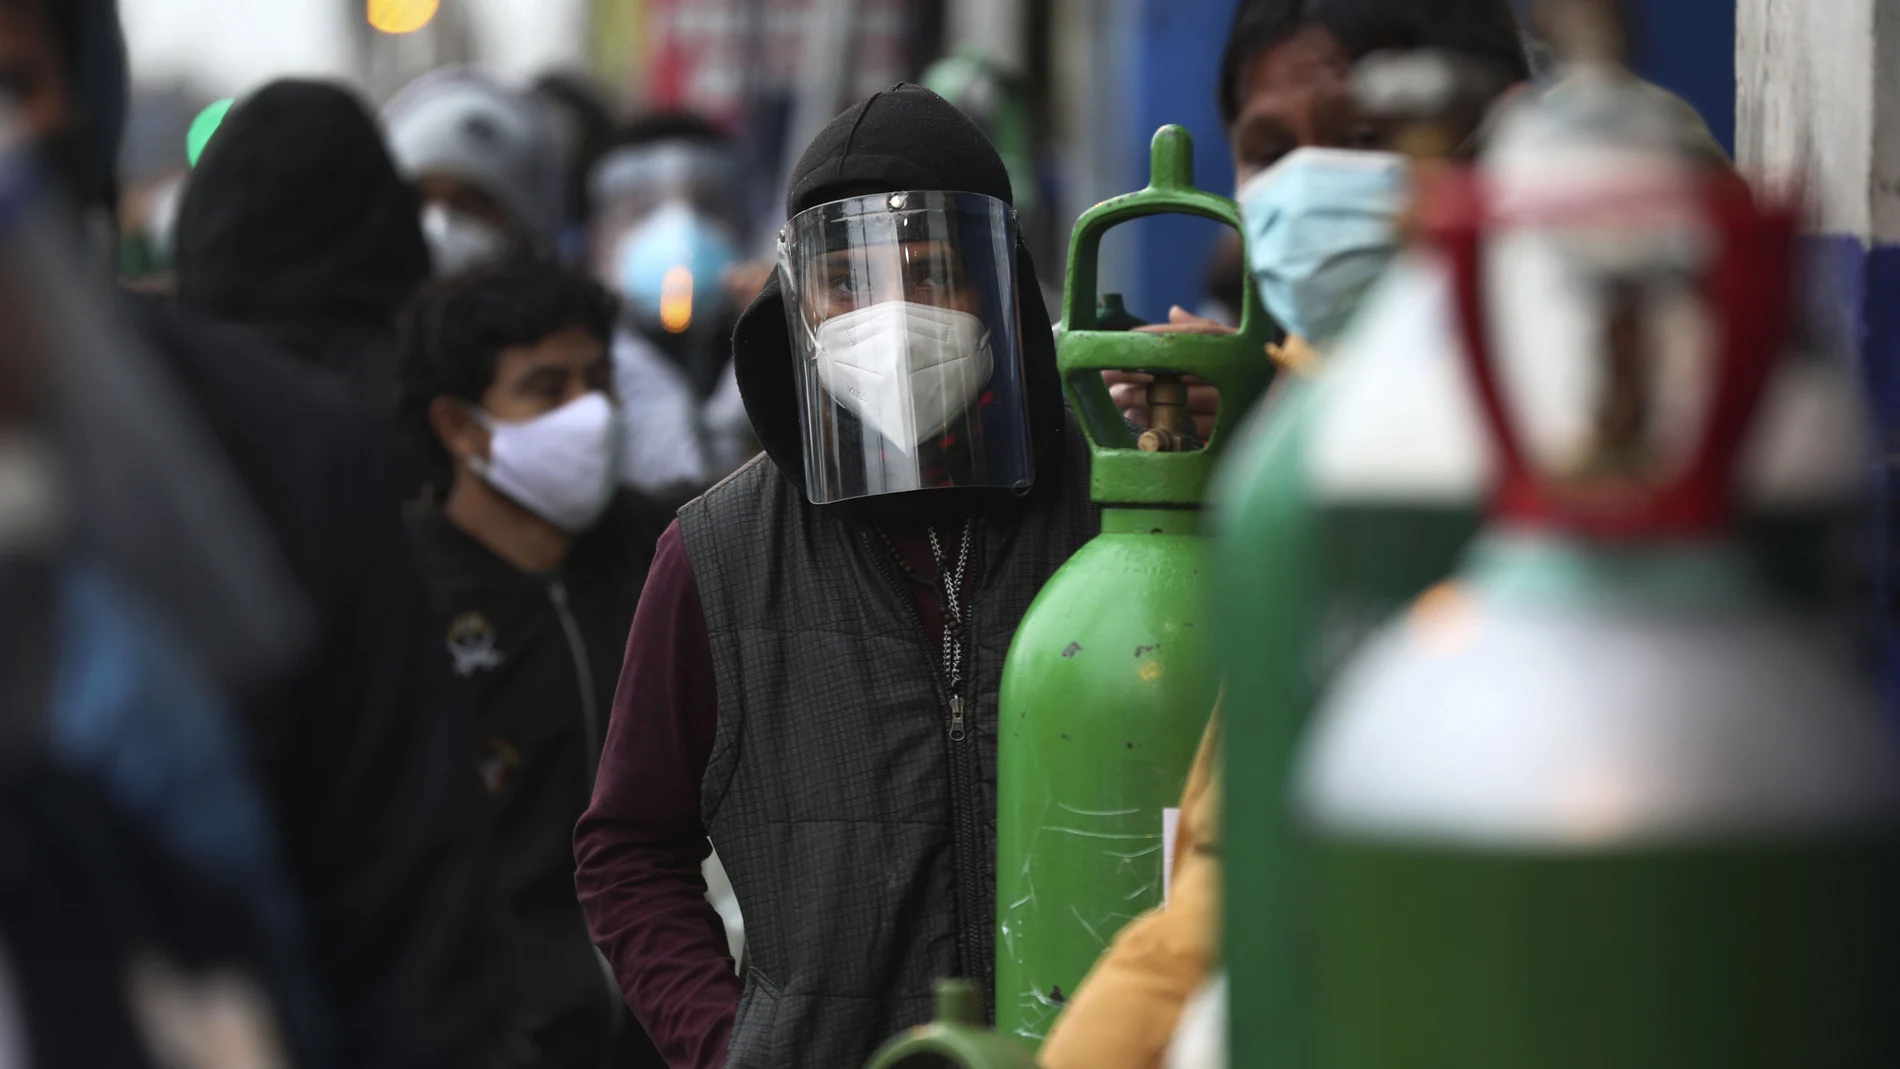 People wait in line with their empty oxygen cylinders to refill at a shop in the San Juan neighborhood of Lima, Peru, Monday, Aug. 3, 2020. Peruvian authorities calculate that more than a quarter of Limaâ€™s population may have been infected with the new coronavirus, and Peru has the highest death rate per million in the Americas. (AP Photo/Martin Mejia)